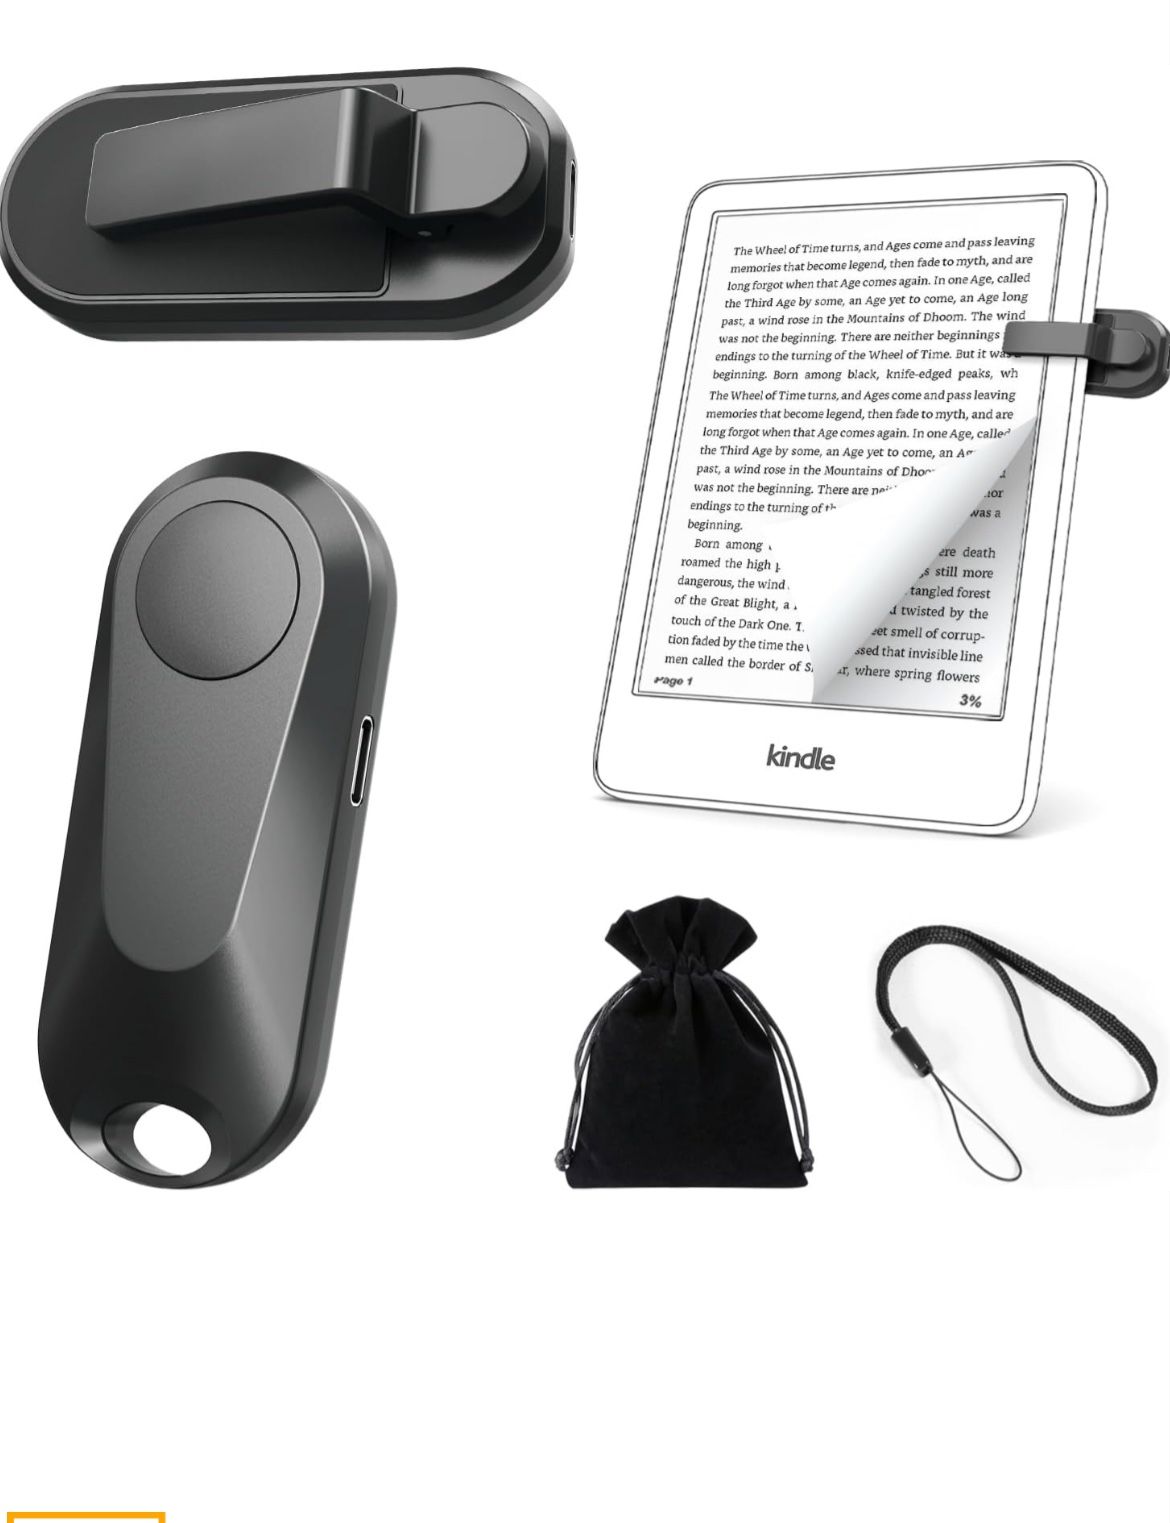  Page Turner for Kindle Paperwhite,Remote Control Page Turner for Kindle Oasis Kobo iPad,Kindle Accessories for Reading in Bed Cam